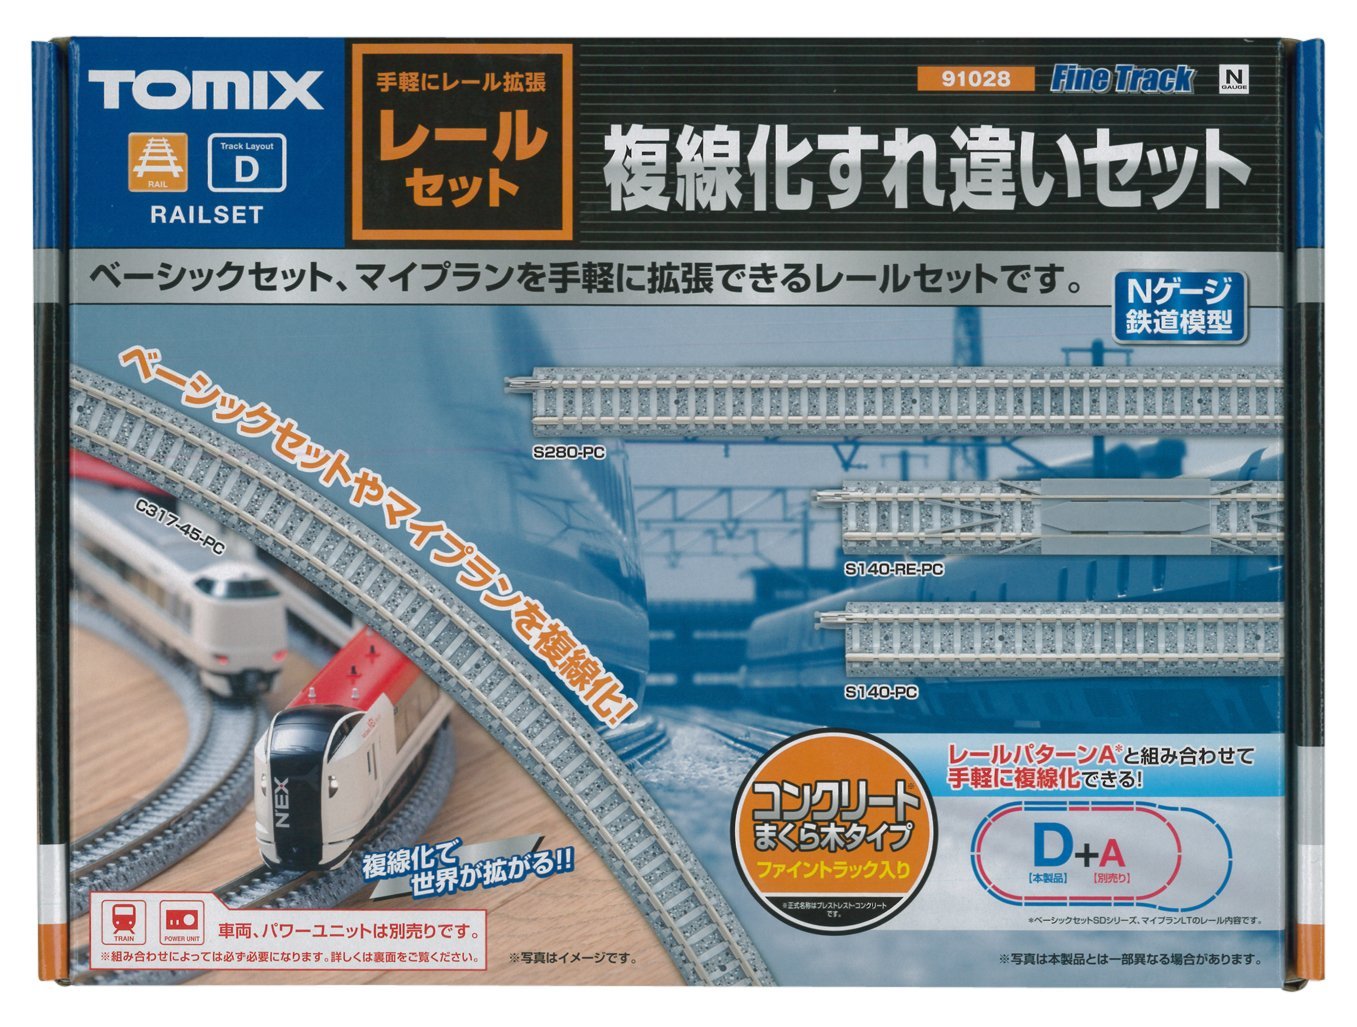 Fine Track Rail Set Double-Tracking Passing Set Track Layout D2